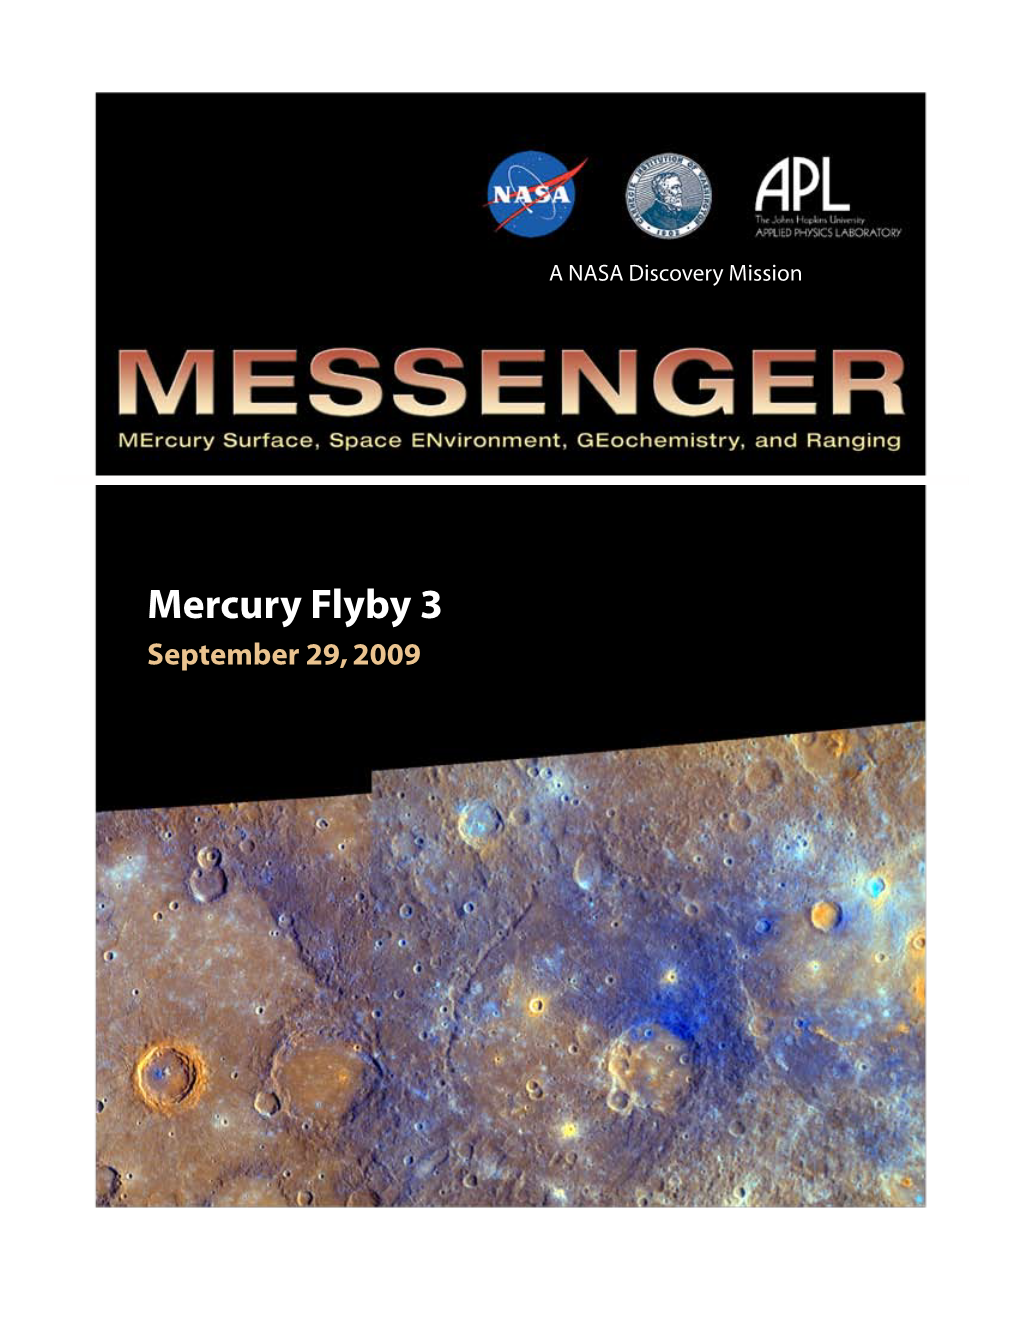 Mercury Flyby 3 September 29, 2009 Media Contacts